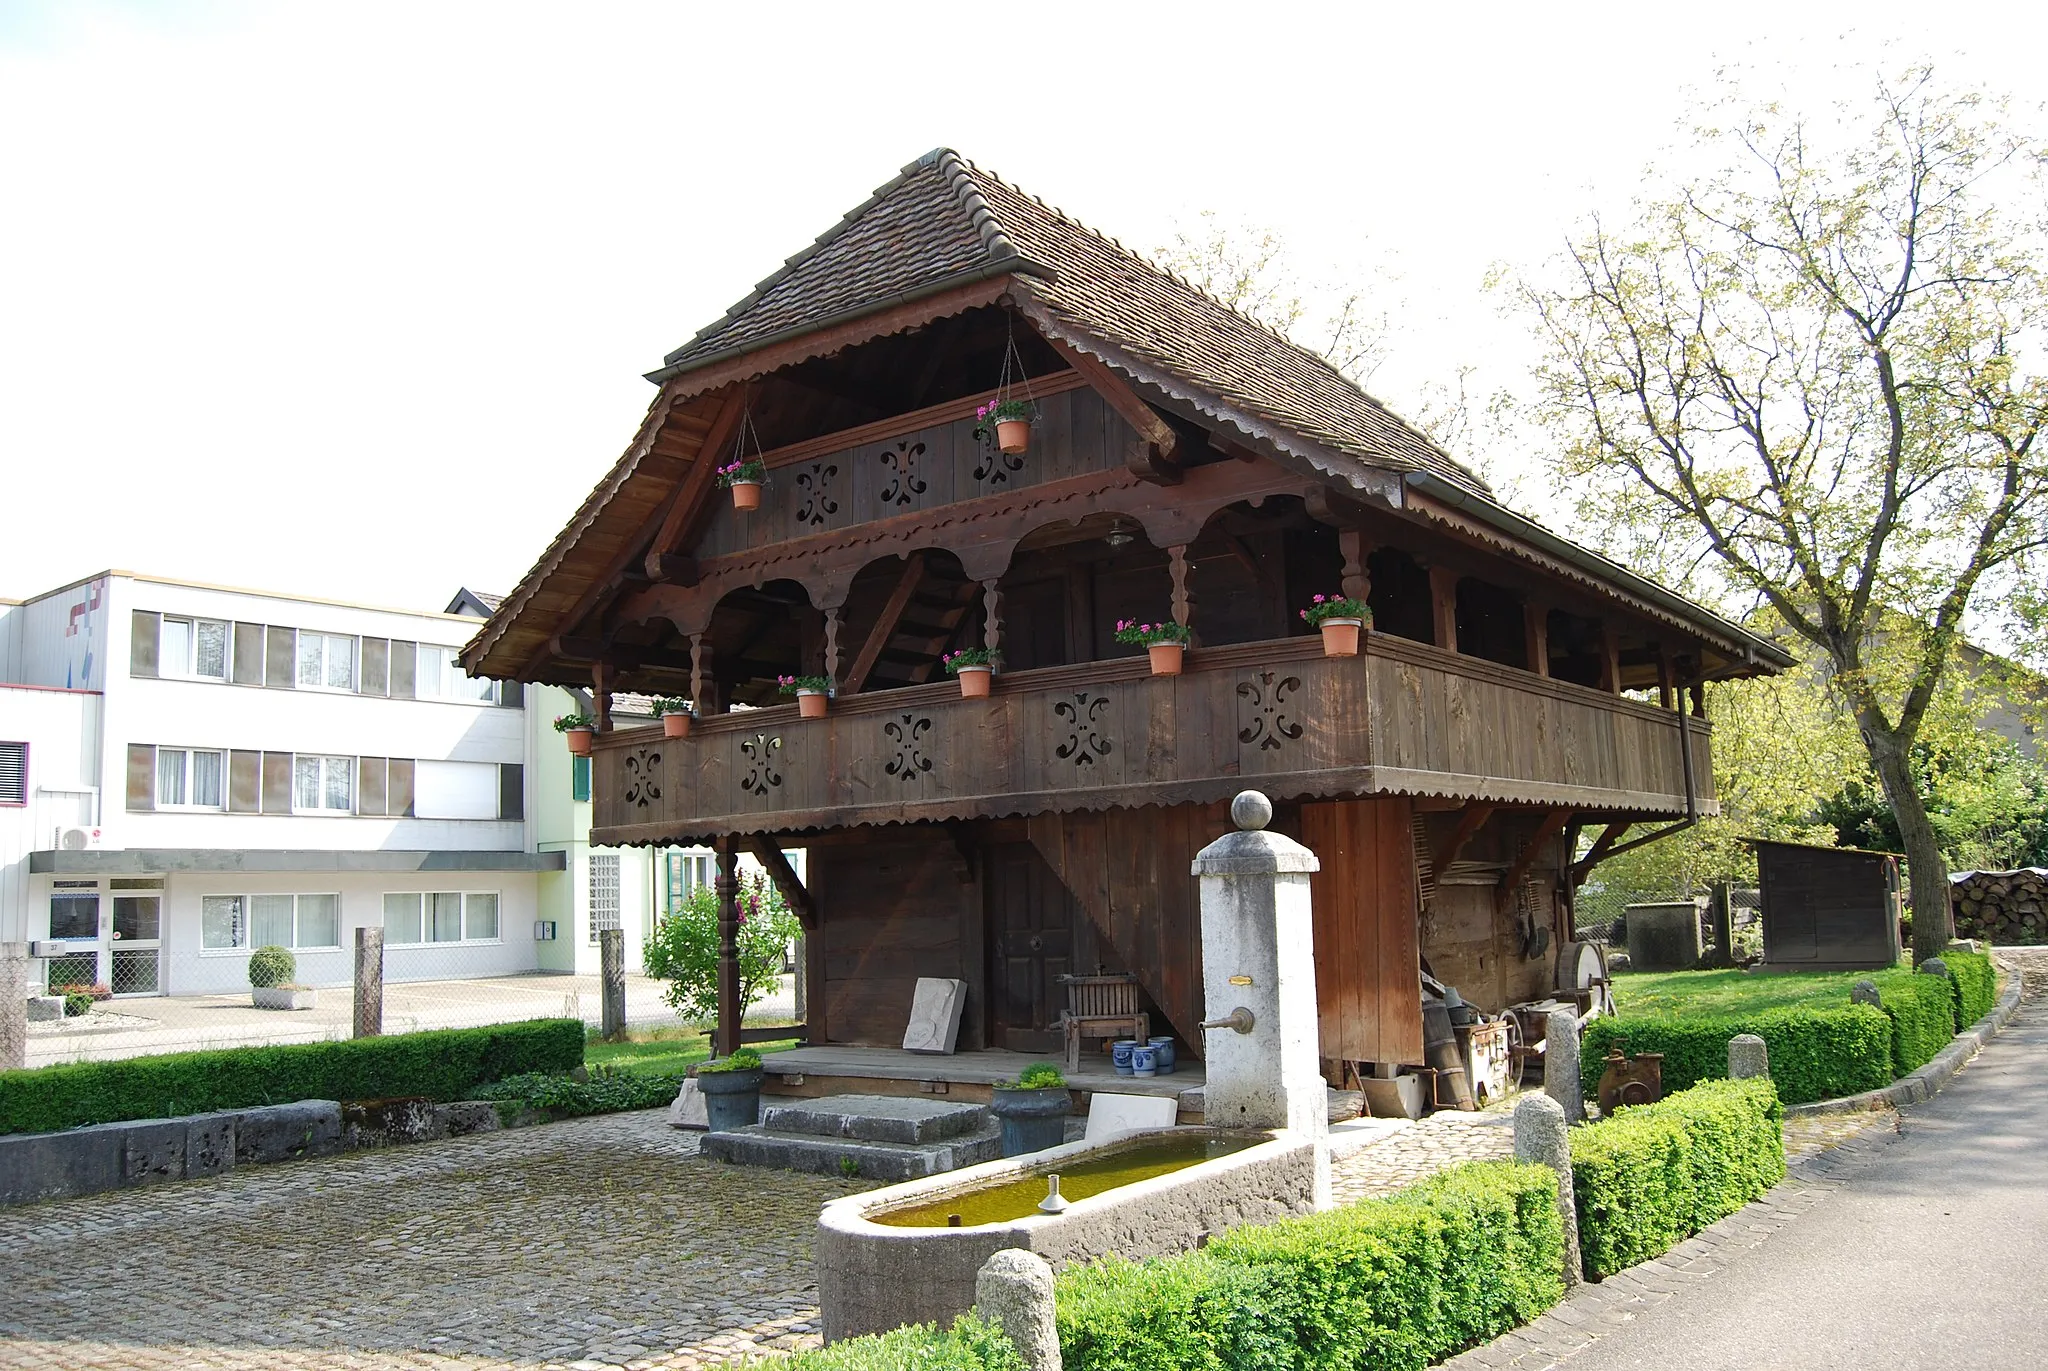 Photo showing: Store house at Gunzgen, canton of Solothurn, Switzerland